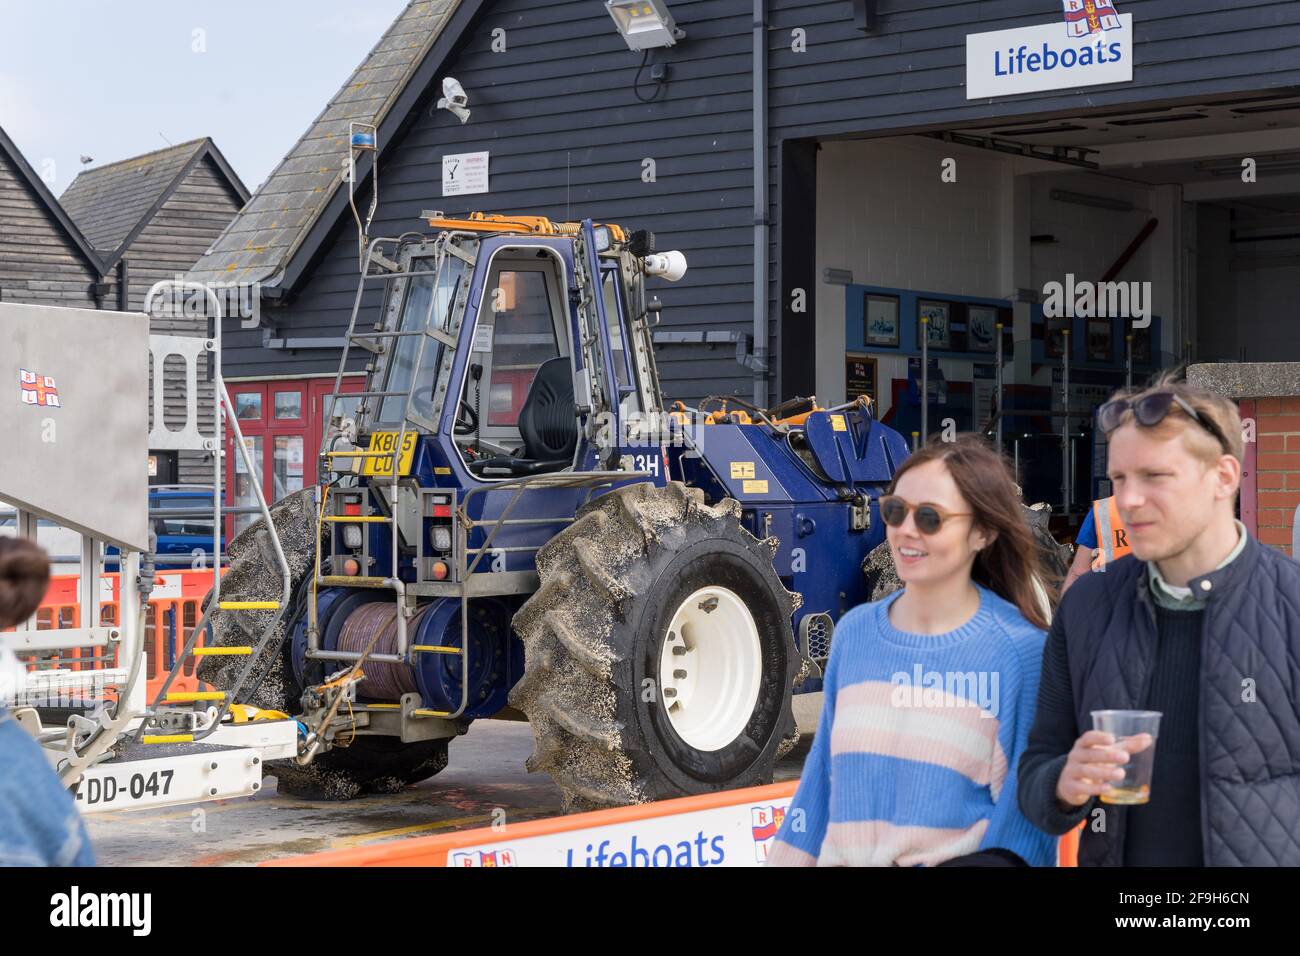 18th April 20201, woman and man with a pint beer in hand inspect the Lifeboat at Whitstable station launched on training Stock Photo